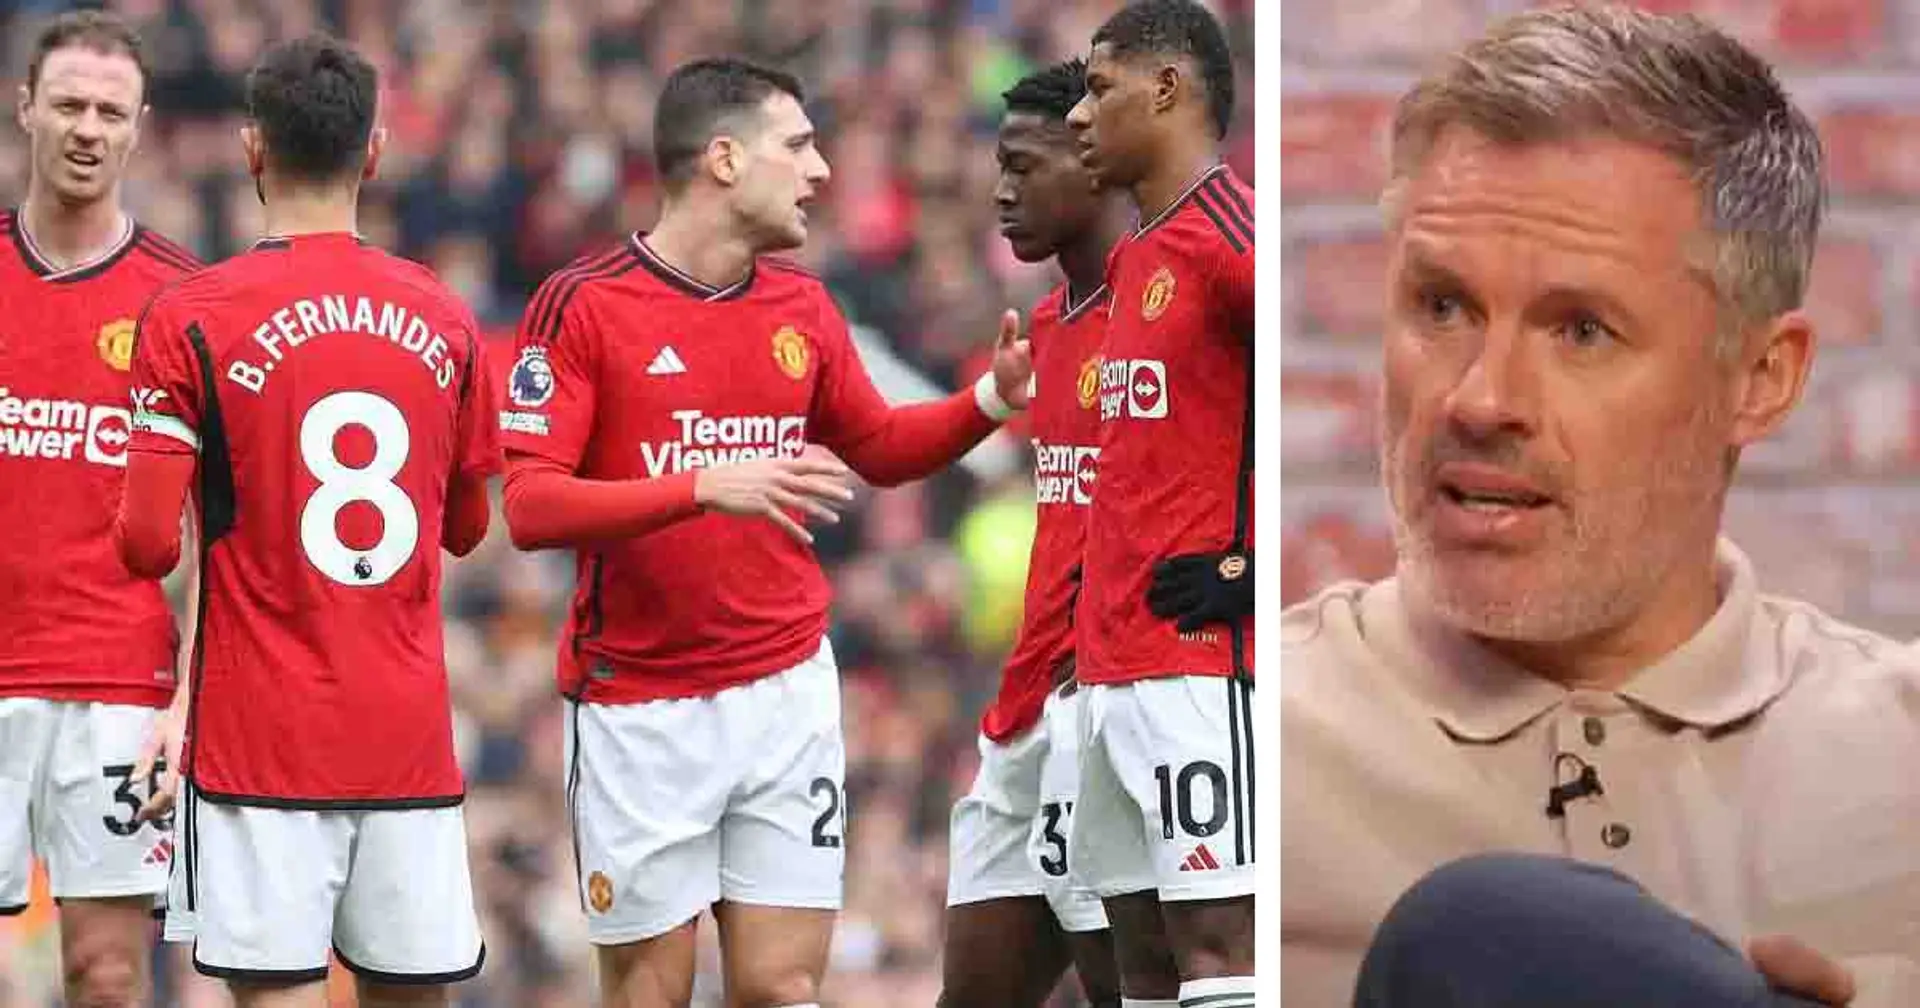 'Could be a real superstar': Jamie Carragher names one Man United player he'd love at Liverpool